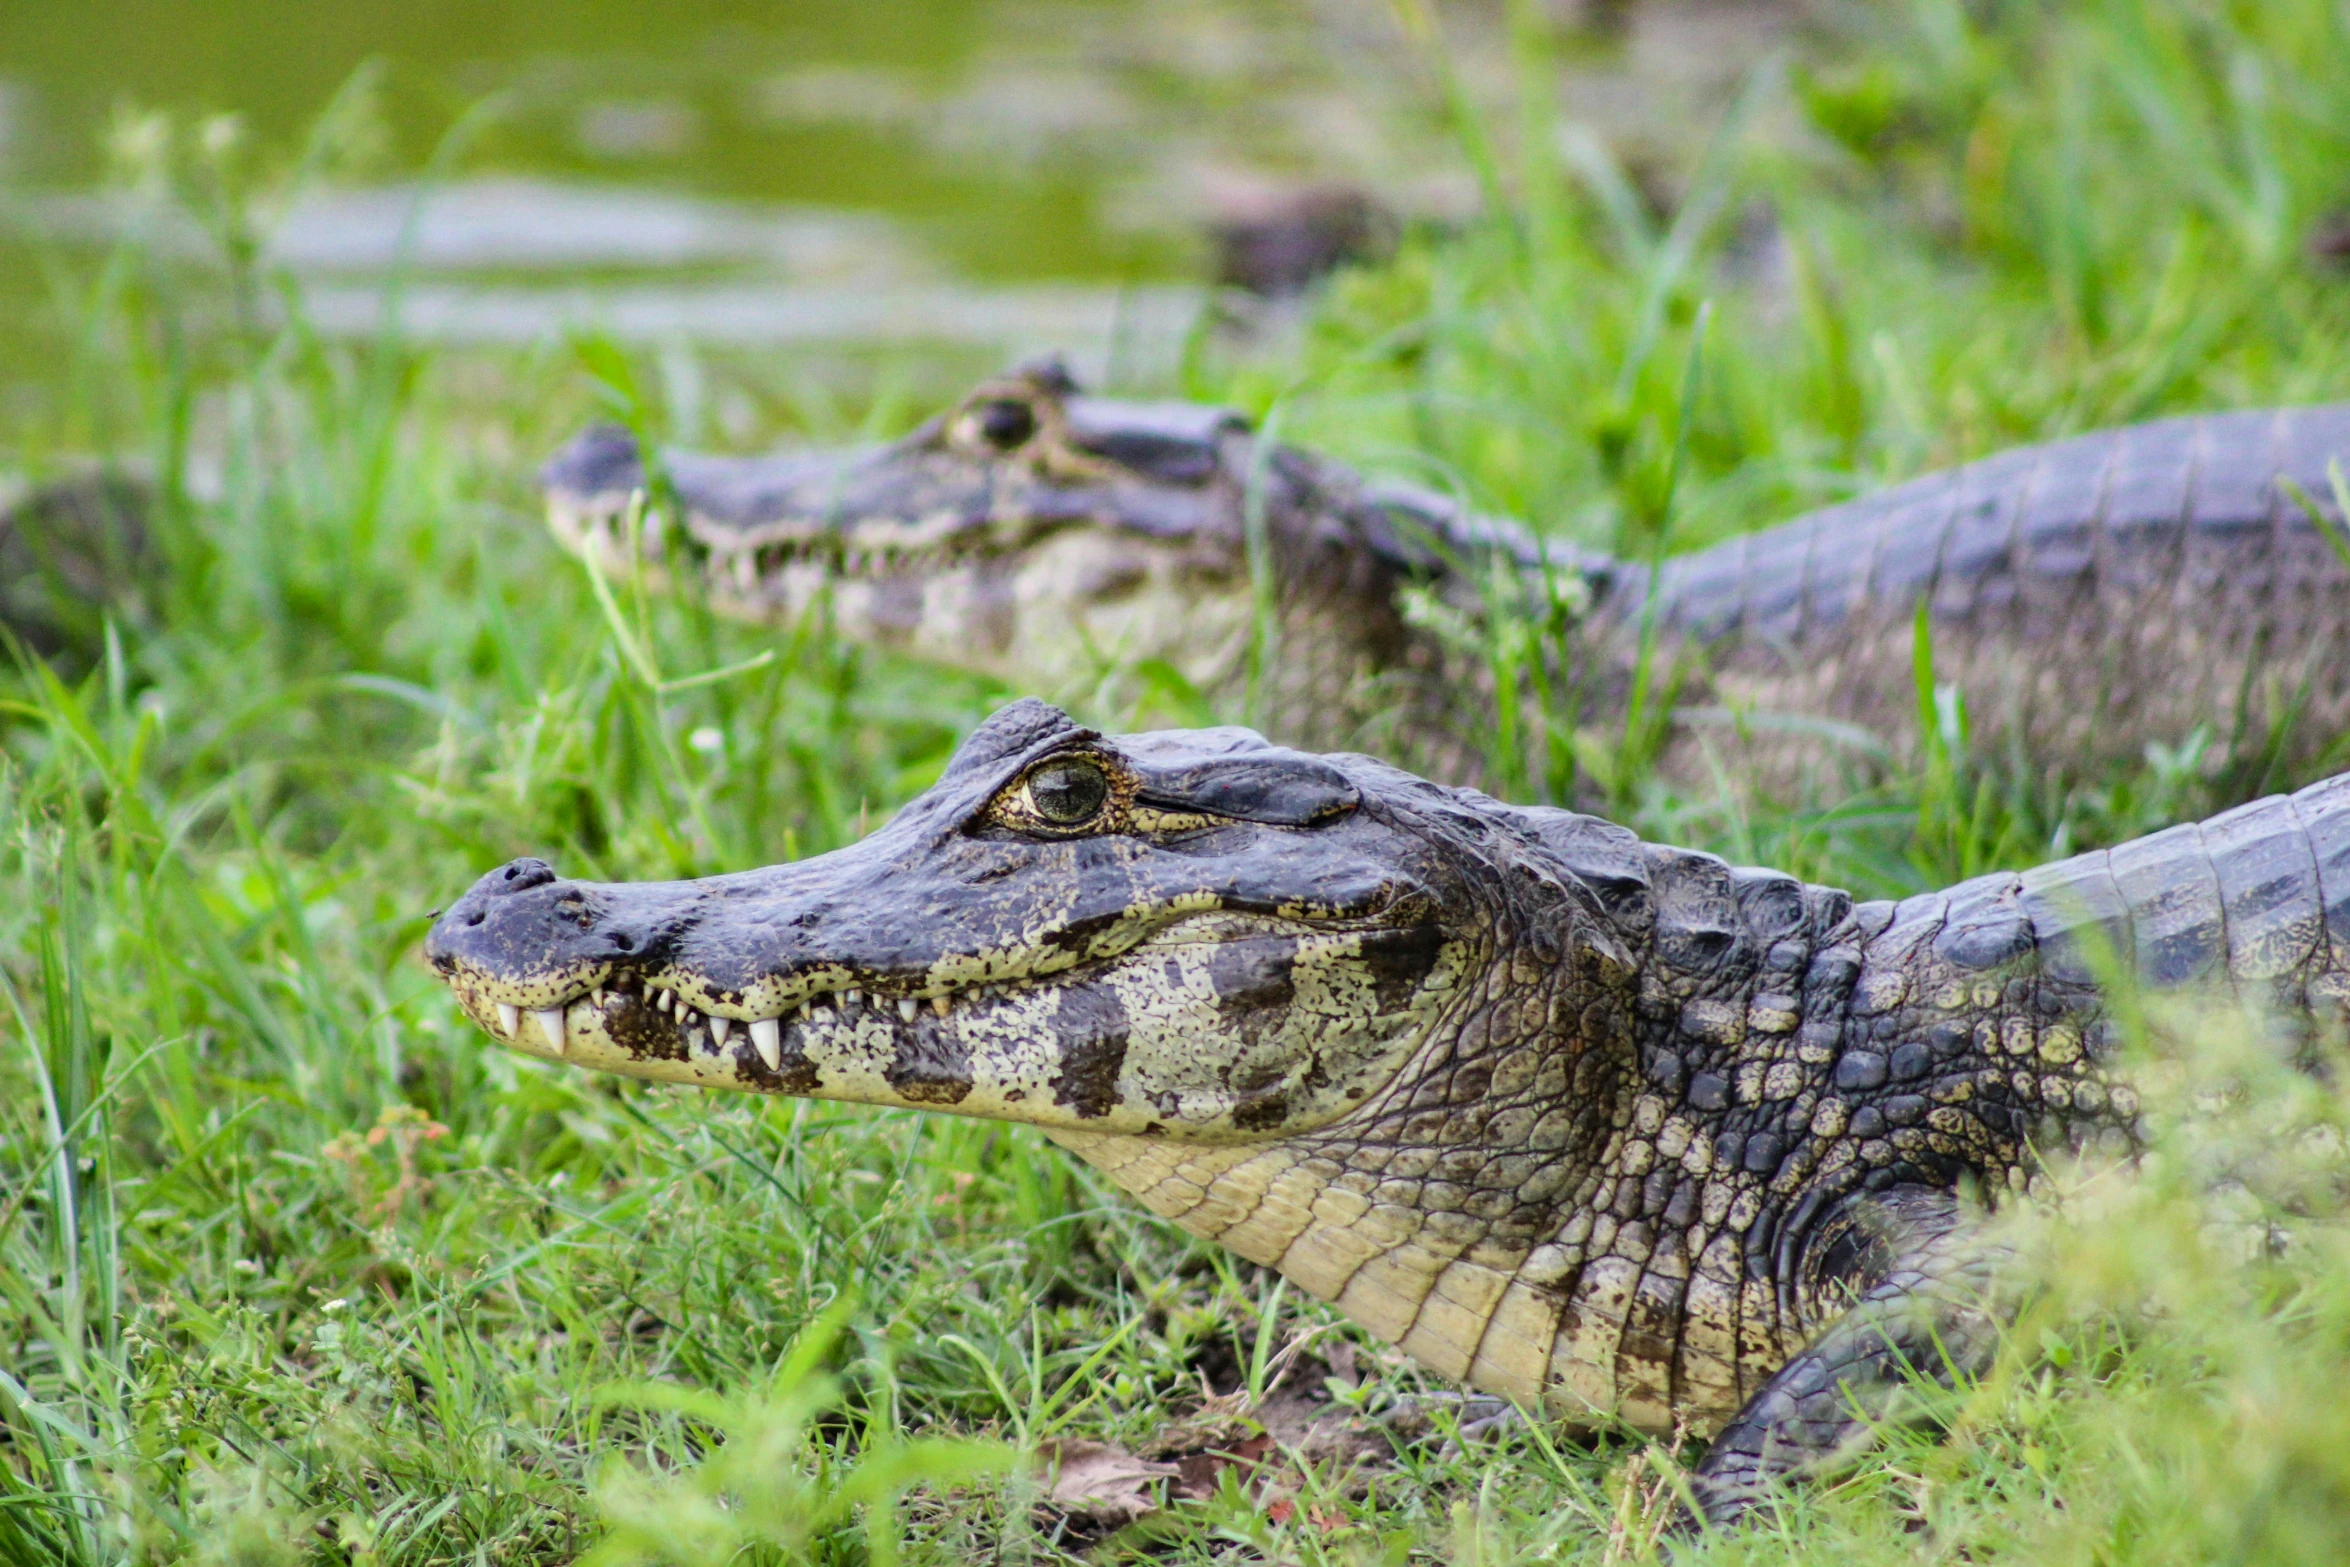 some alligators are sitting together in some grass